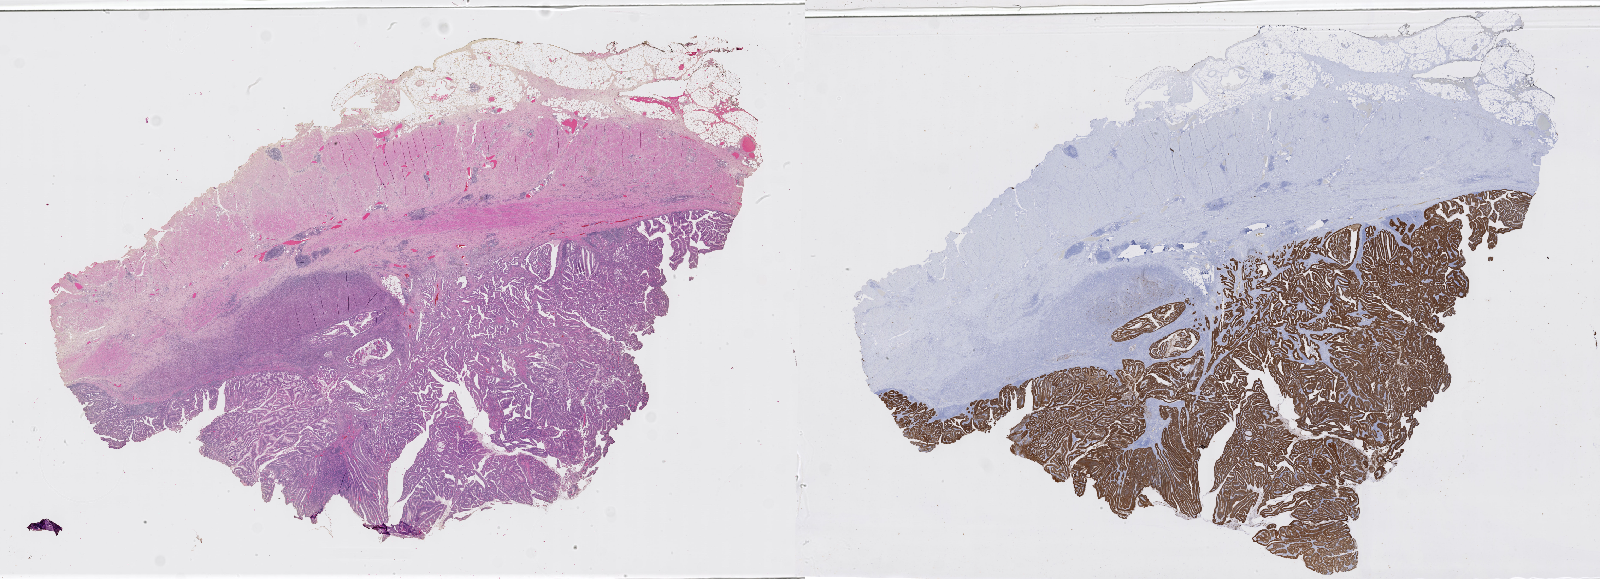 Figure 2.3. Example of two whole-slide images (WSI) extracted from the same tissue block from a colorectal tumour. Stained with (left) H&E and (right) anti-pan-cytokeratin IHC with haematoxylin counterstain.